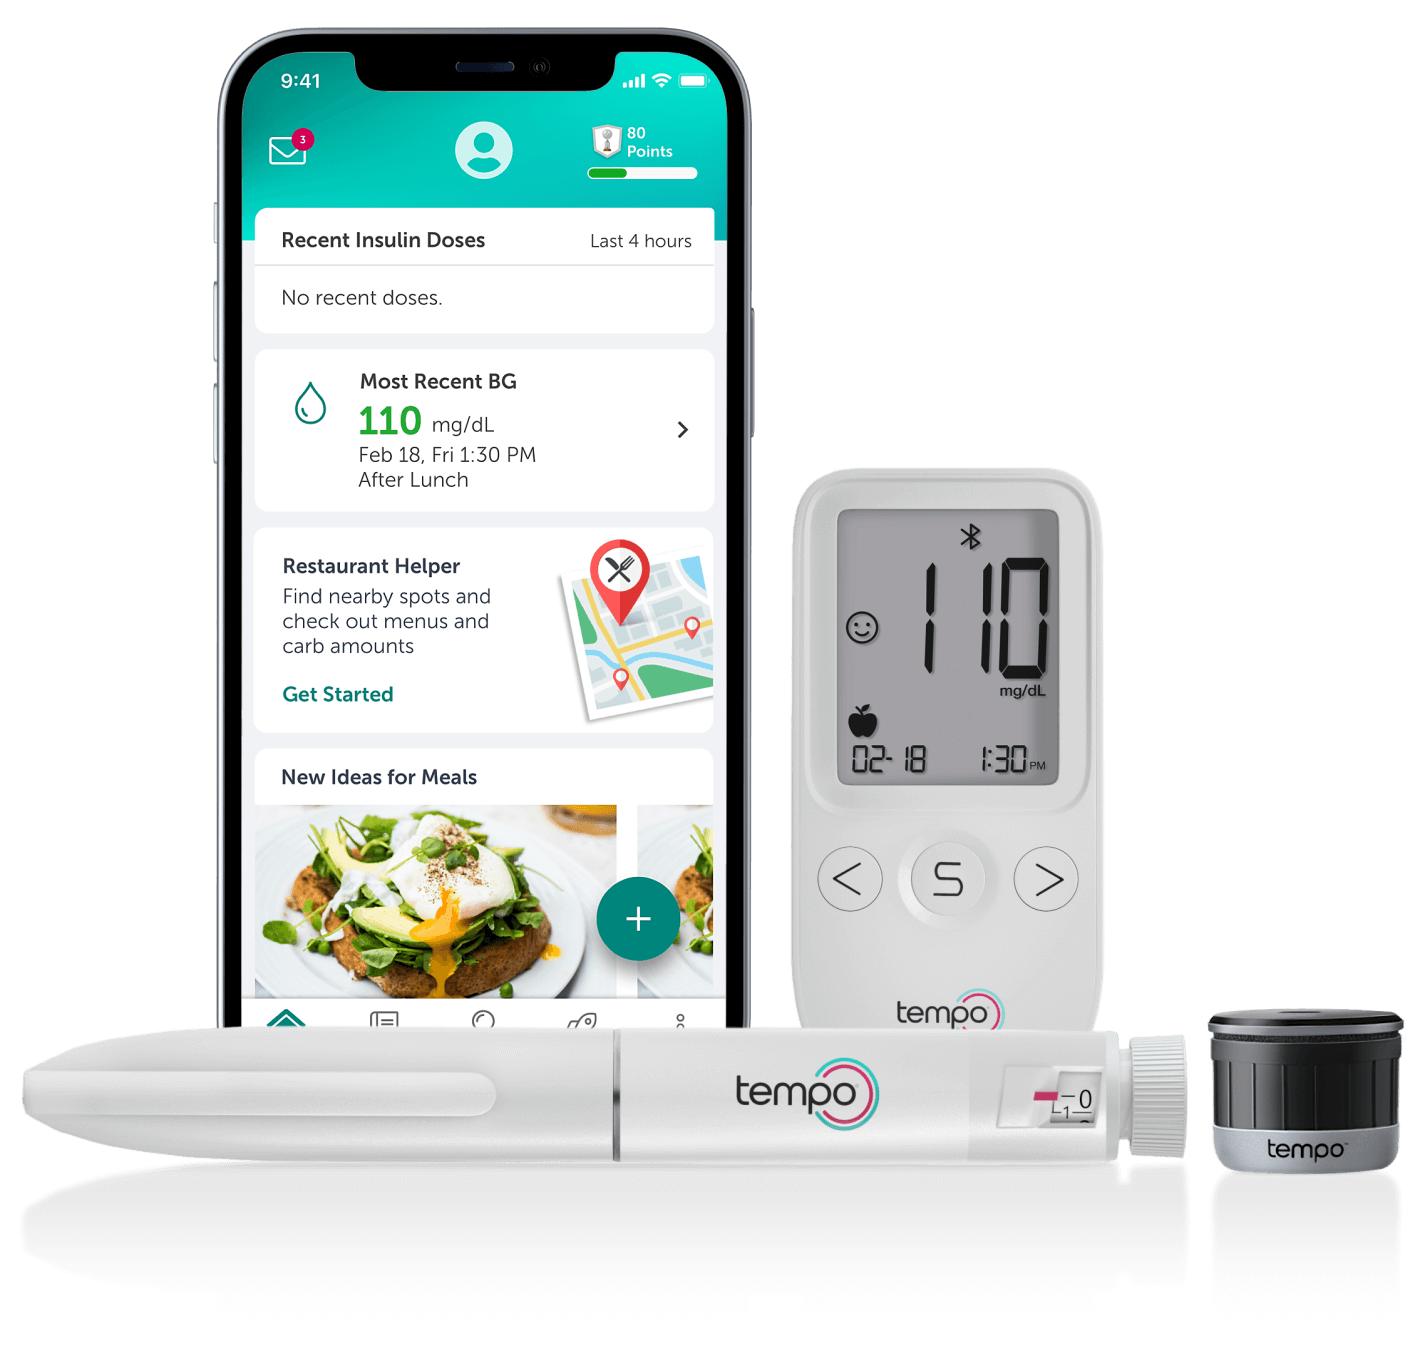 Product images including a smartphone device, blood glucose monitor, insulin pen, and Tempo Smart Button